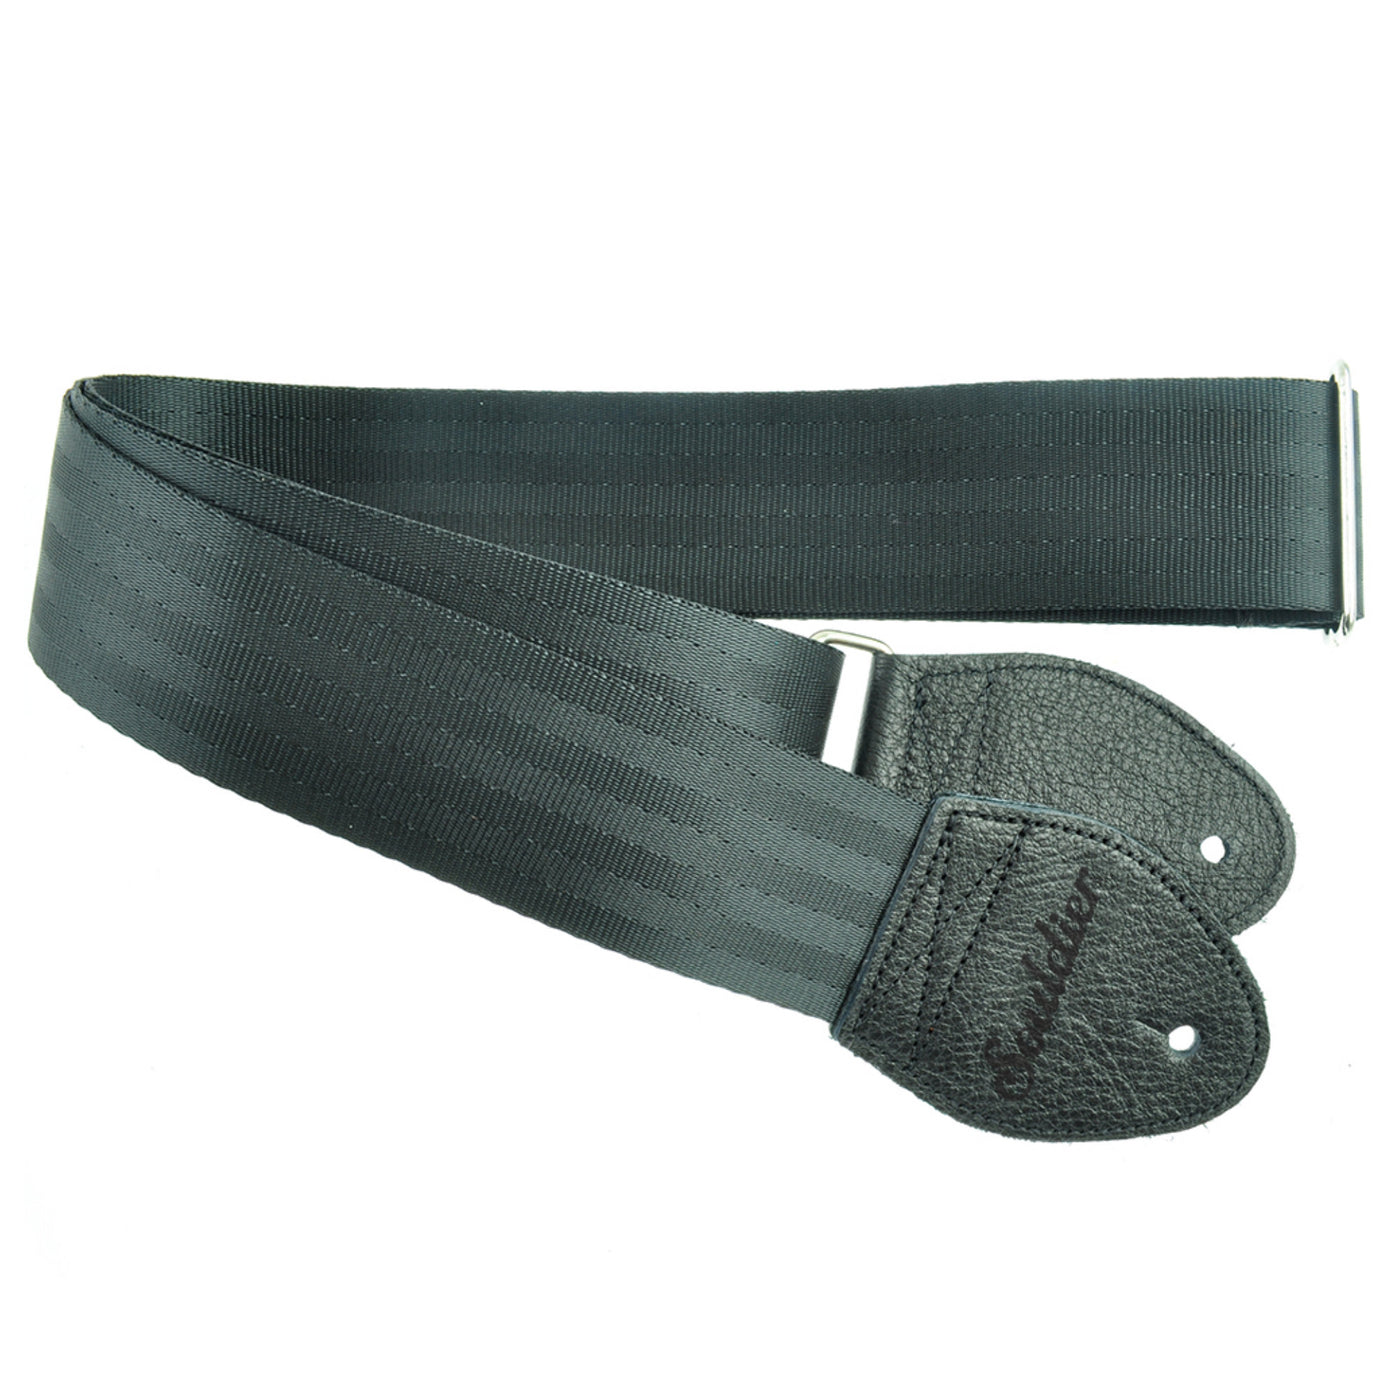 Souldier GS0000BK04BK - Handmade Seatbelt Guitar Strap for Bass, Electric or Acoustic Guitar, 2 Inches Wide and Adjustable Length from 30" to 63"  Made in the USA, Black